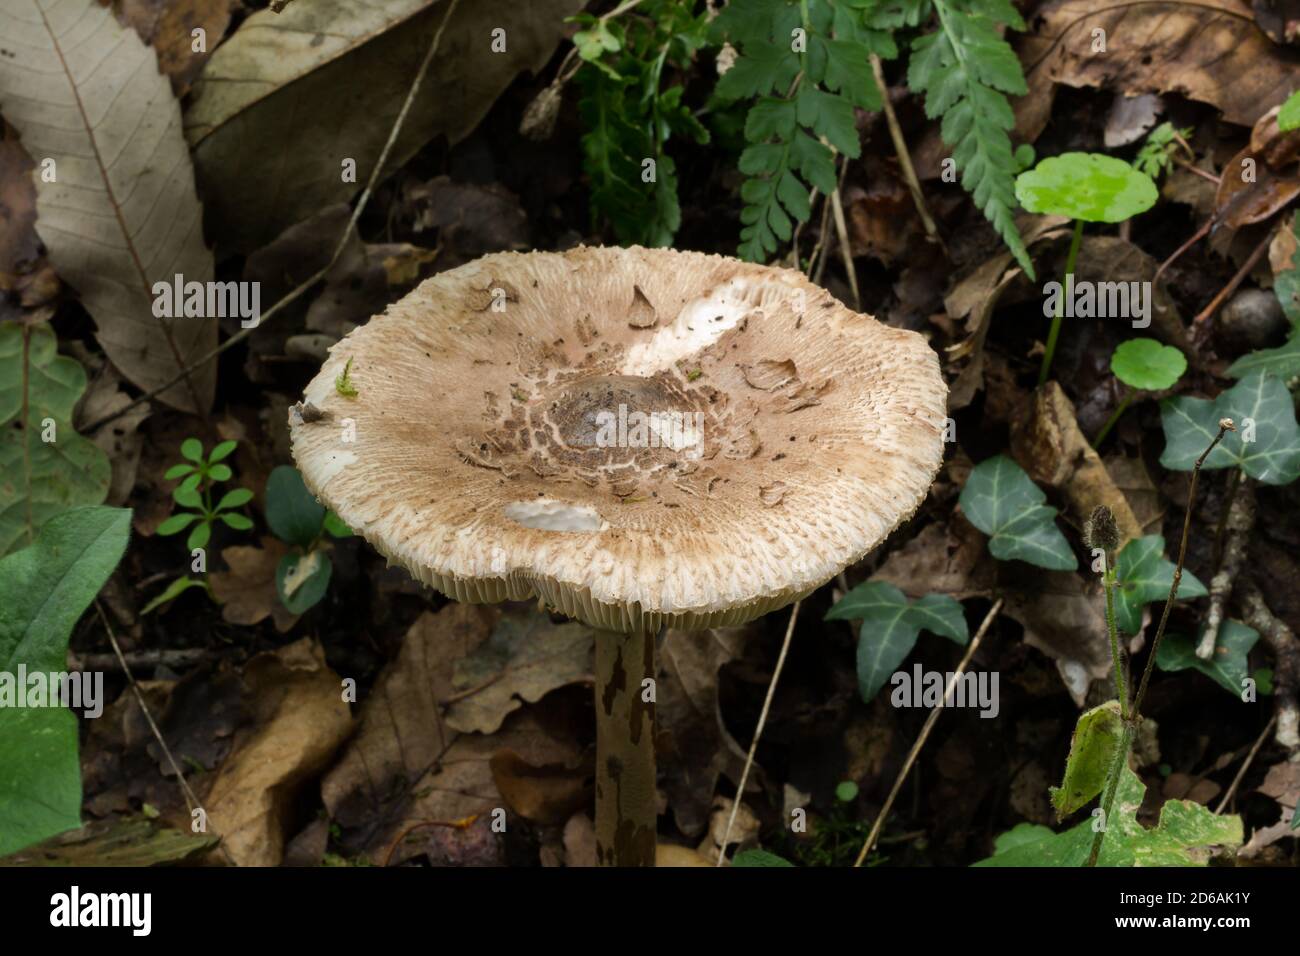 Top of what is possibly the Agaricus buckmacadooi mushroom.  Found alone in a damp area of French woodland.  There were a number of dead trees around. Stock Photo